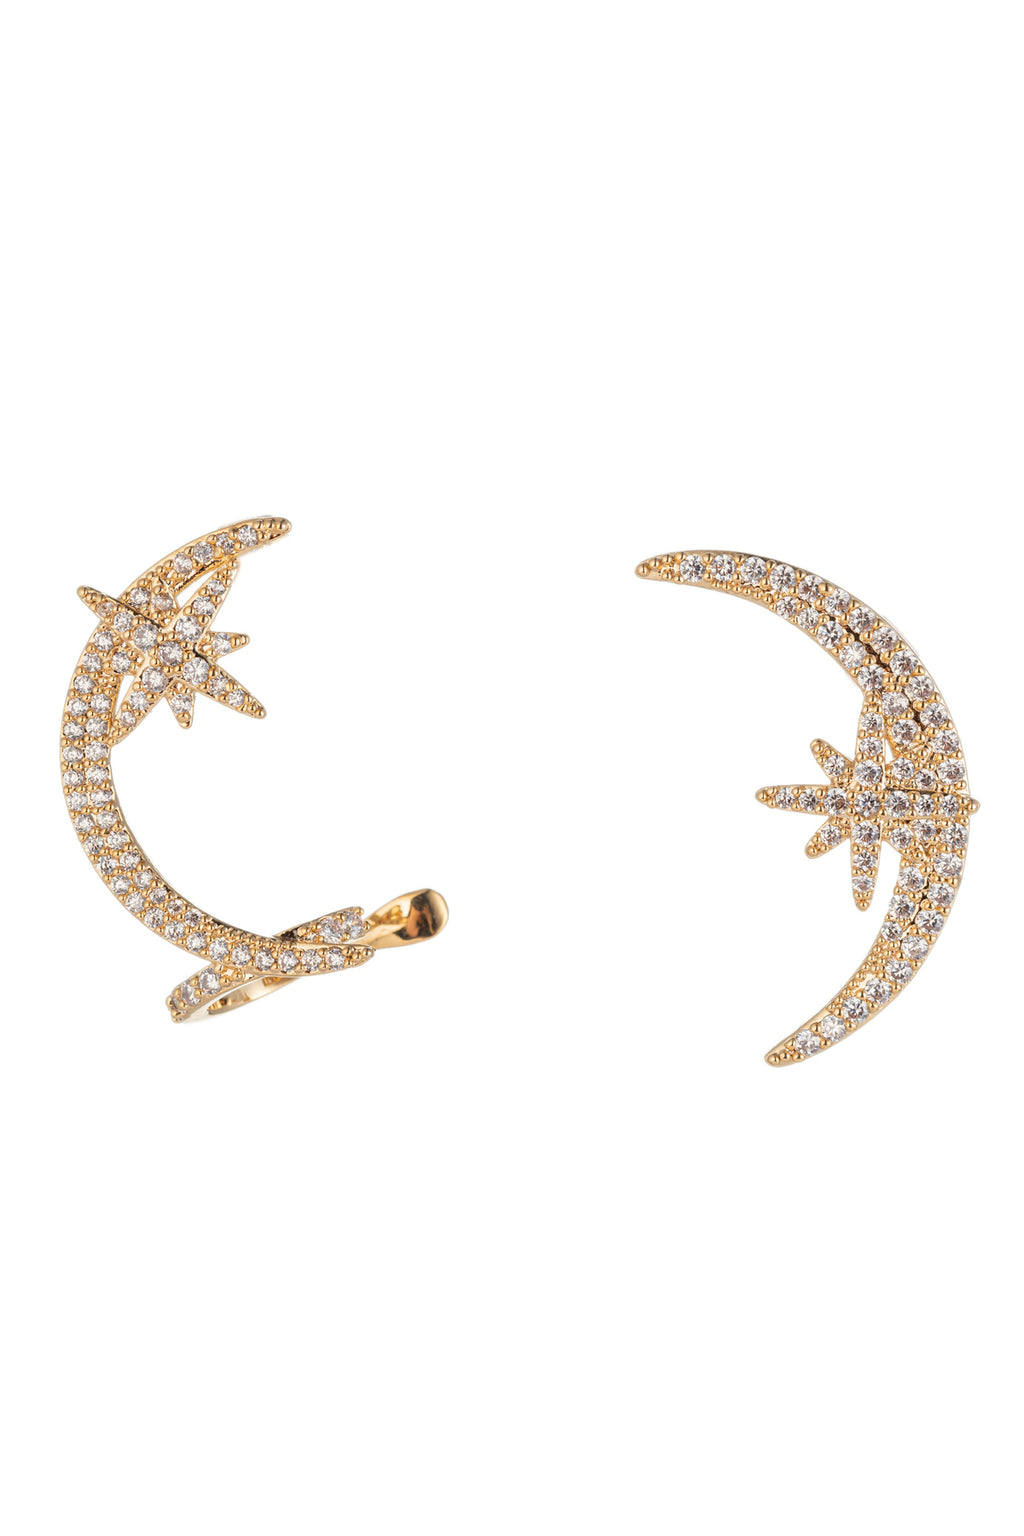 Gold tone brass moon cuff earrings studded with CZ crystals.